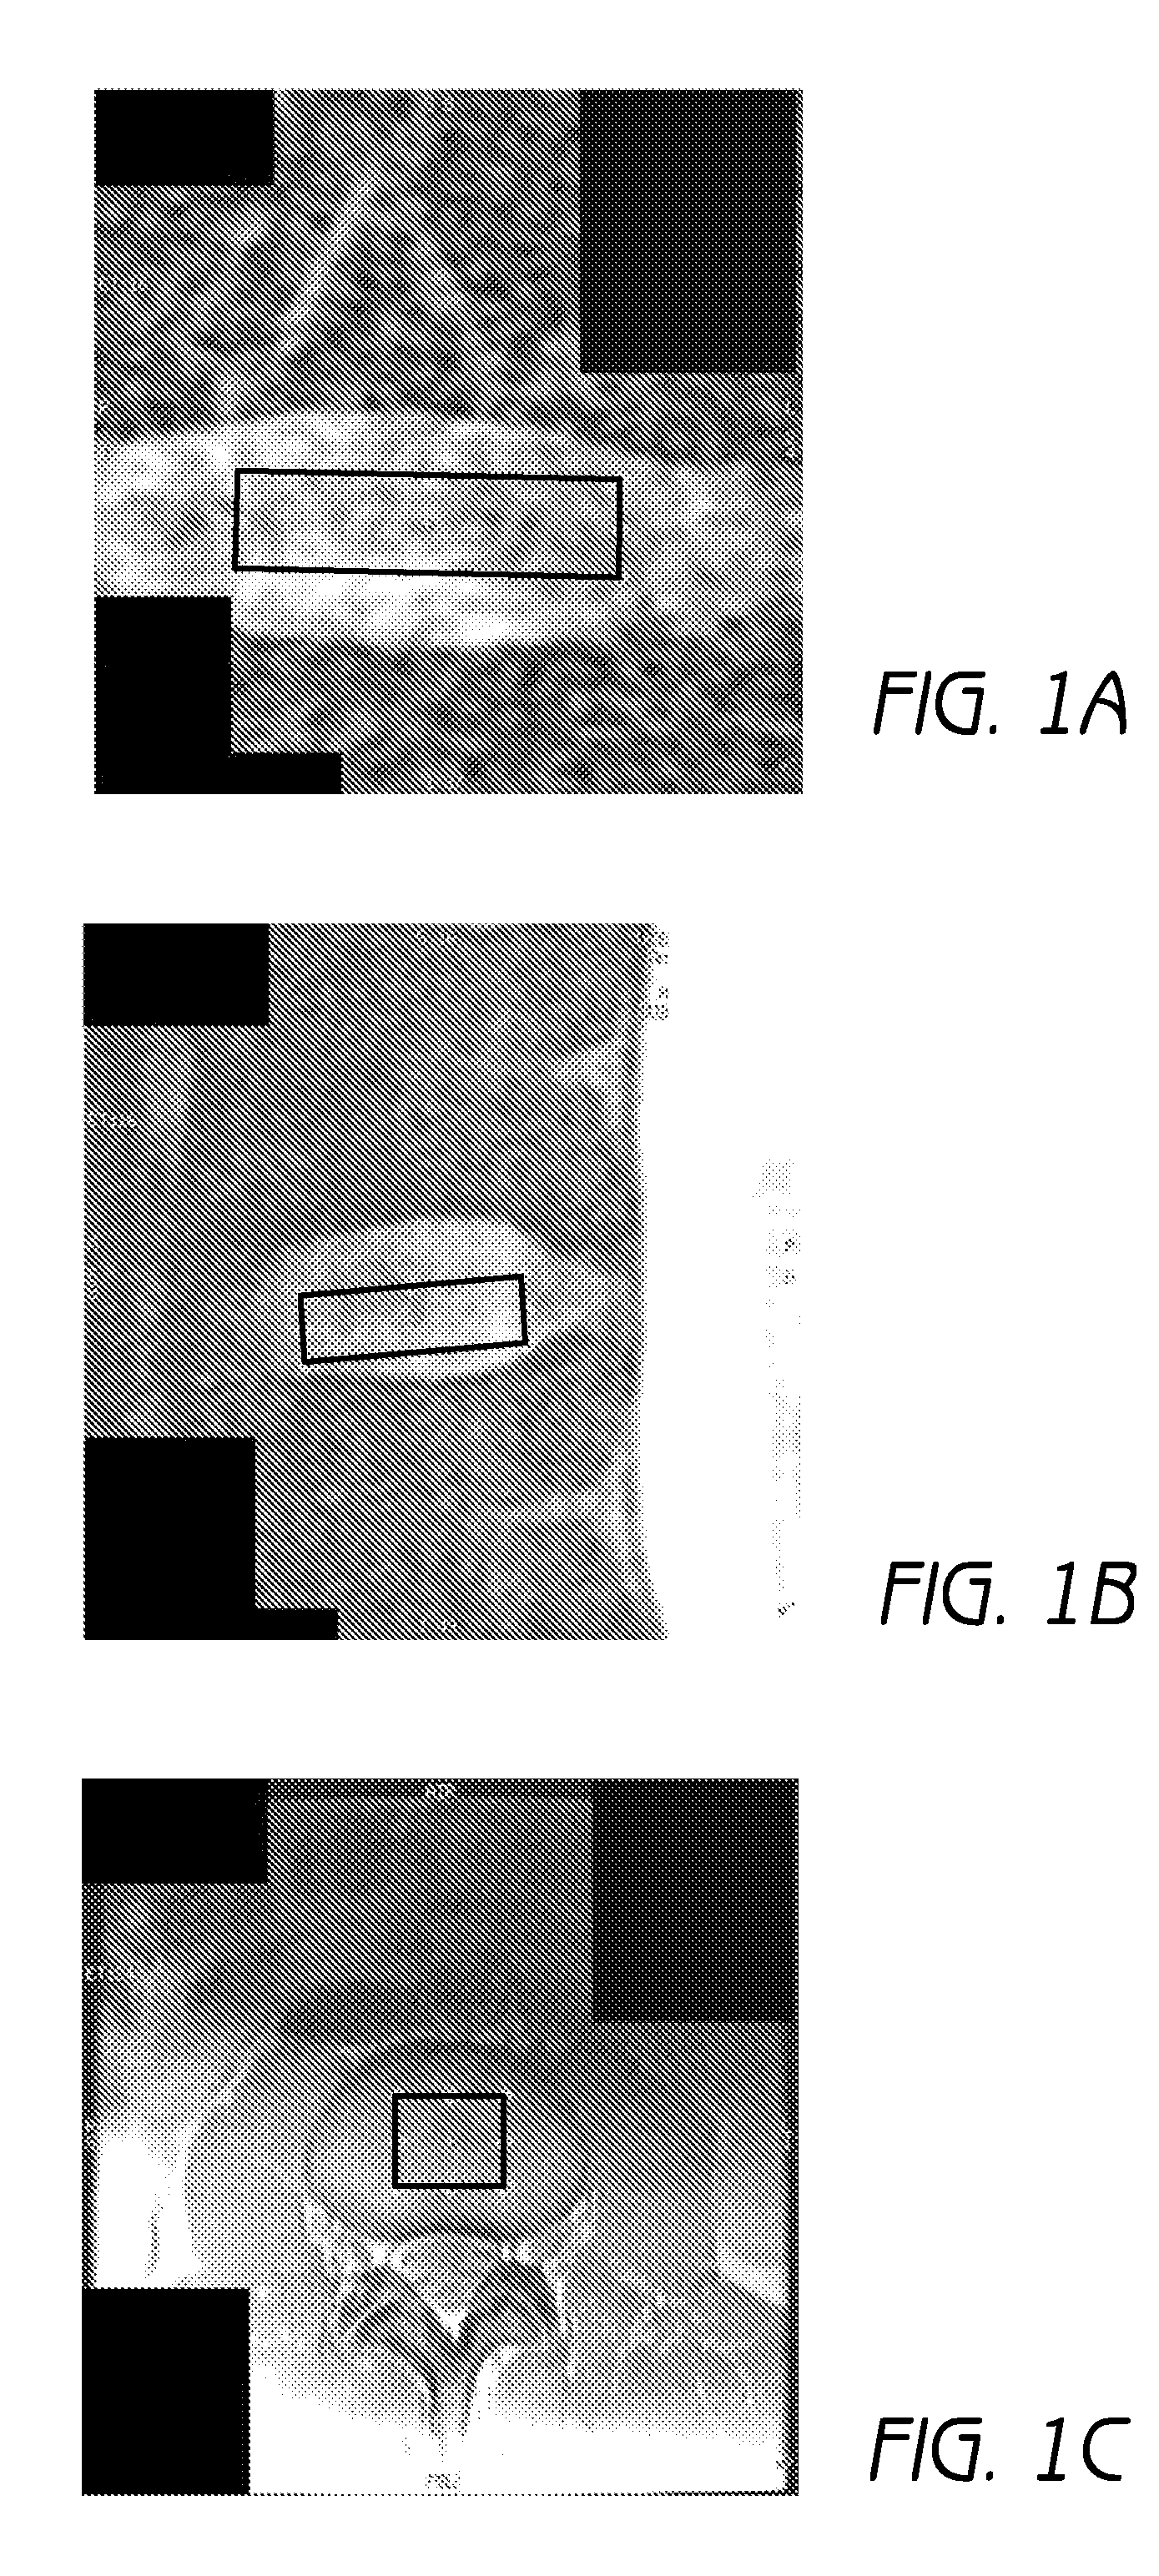 Mr spectroscopy system and method for diagnosing painful and non-painful intervertebral discs